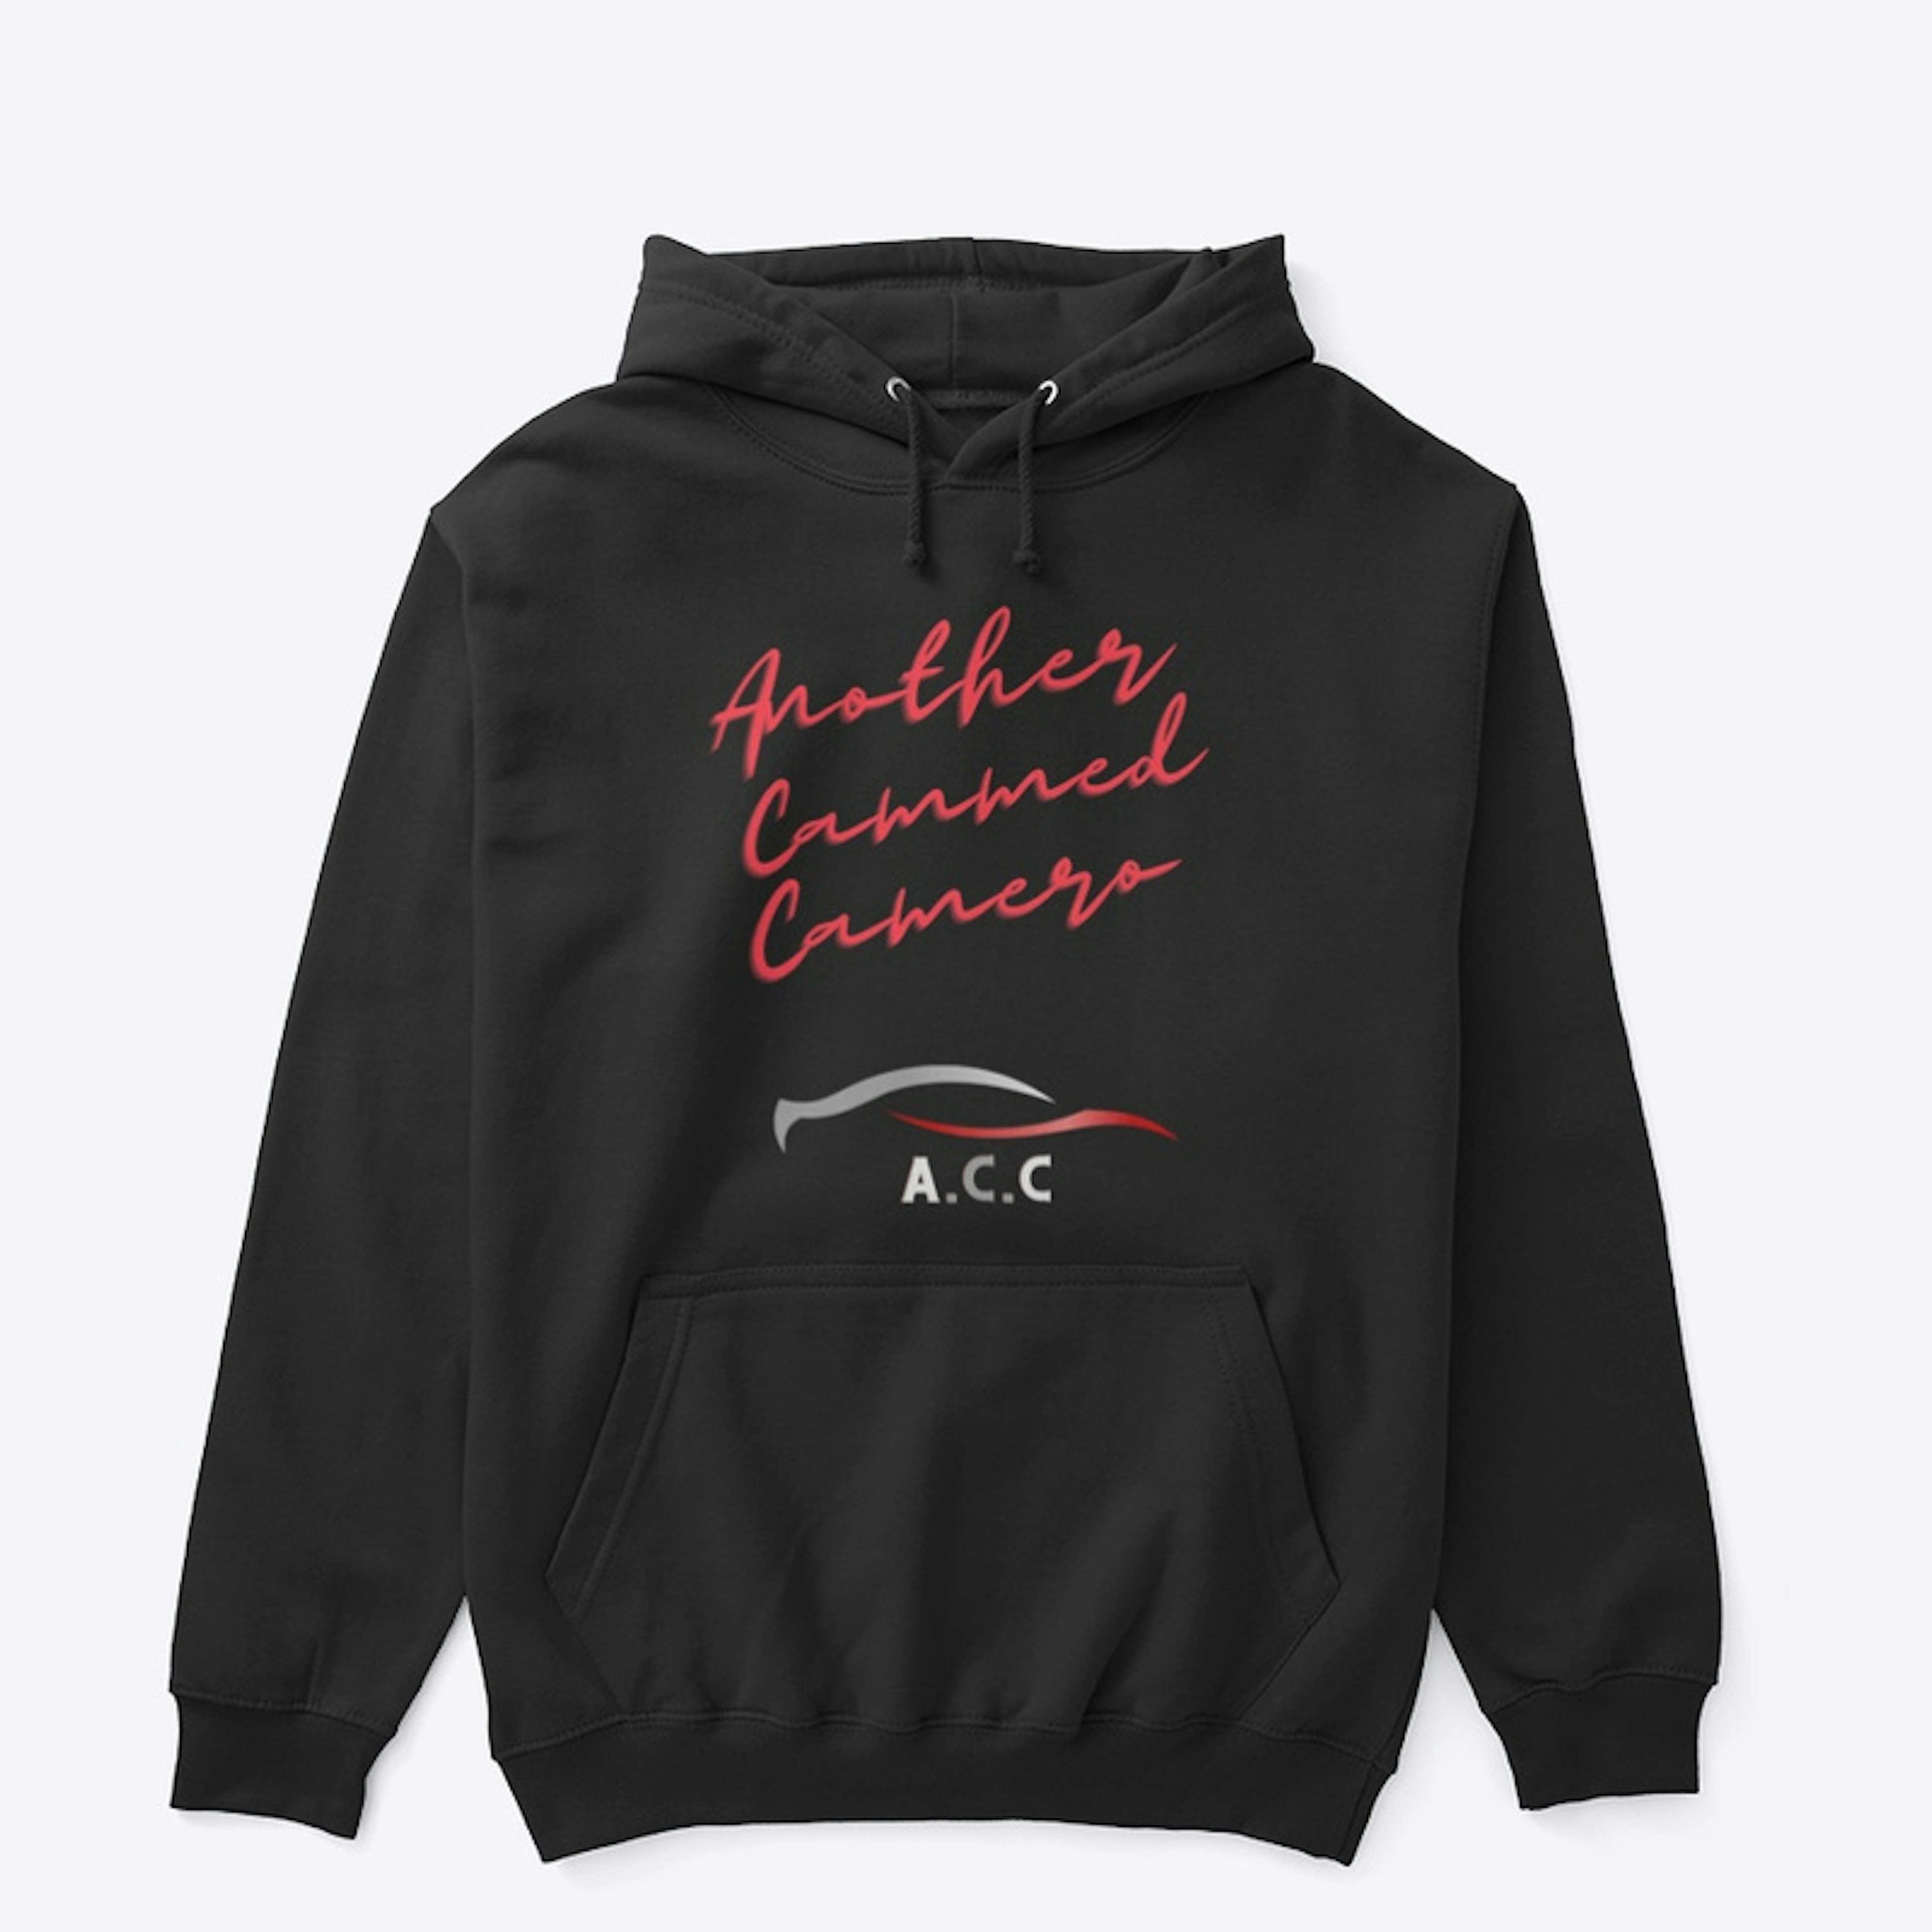 ANOTHER CAMMED CAMERO HOODIE